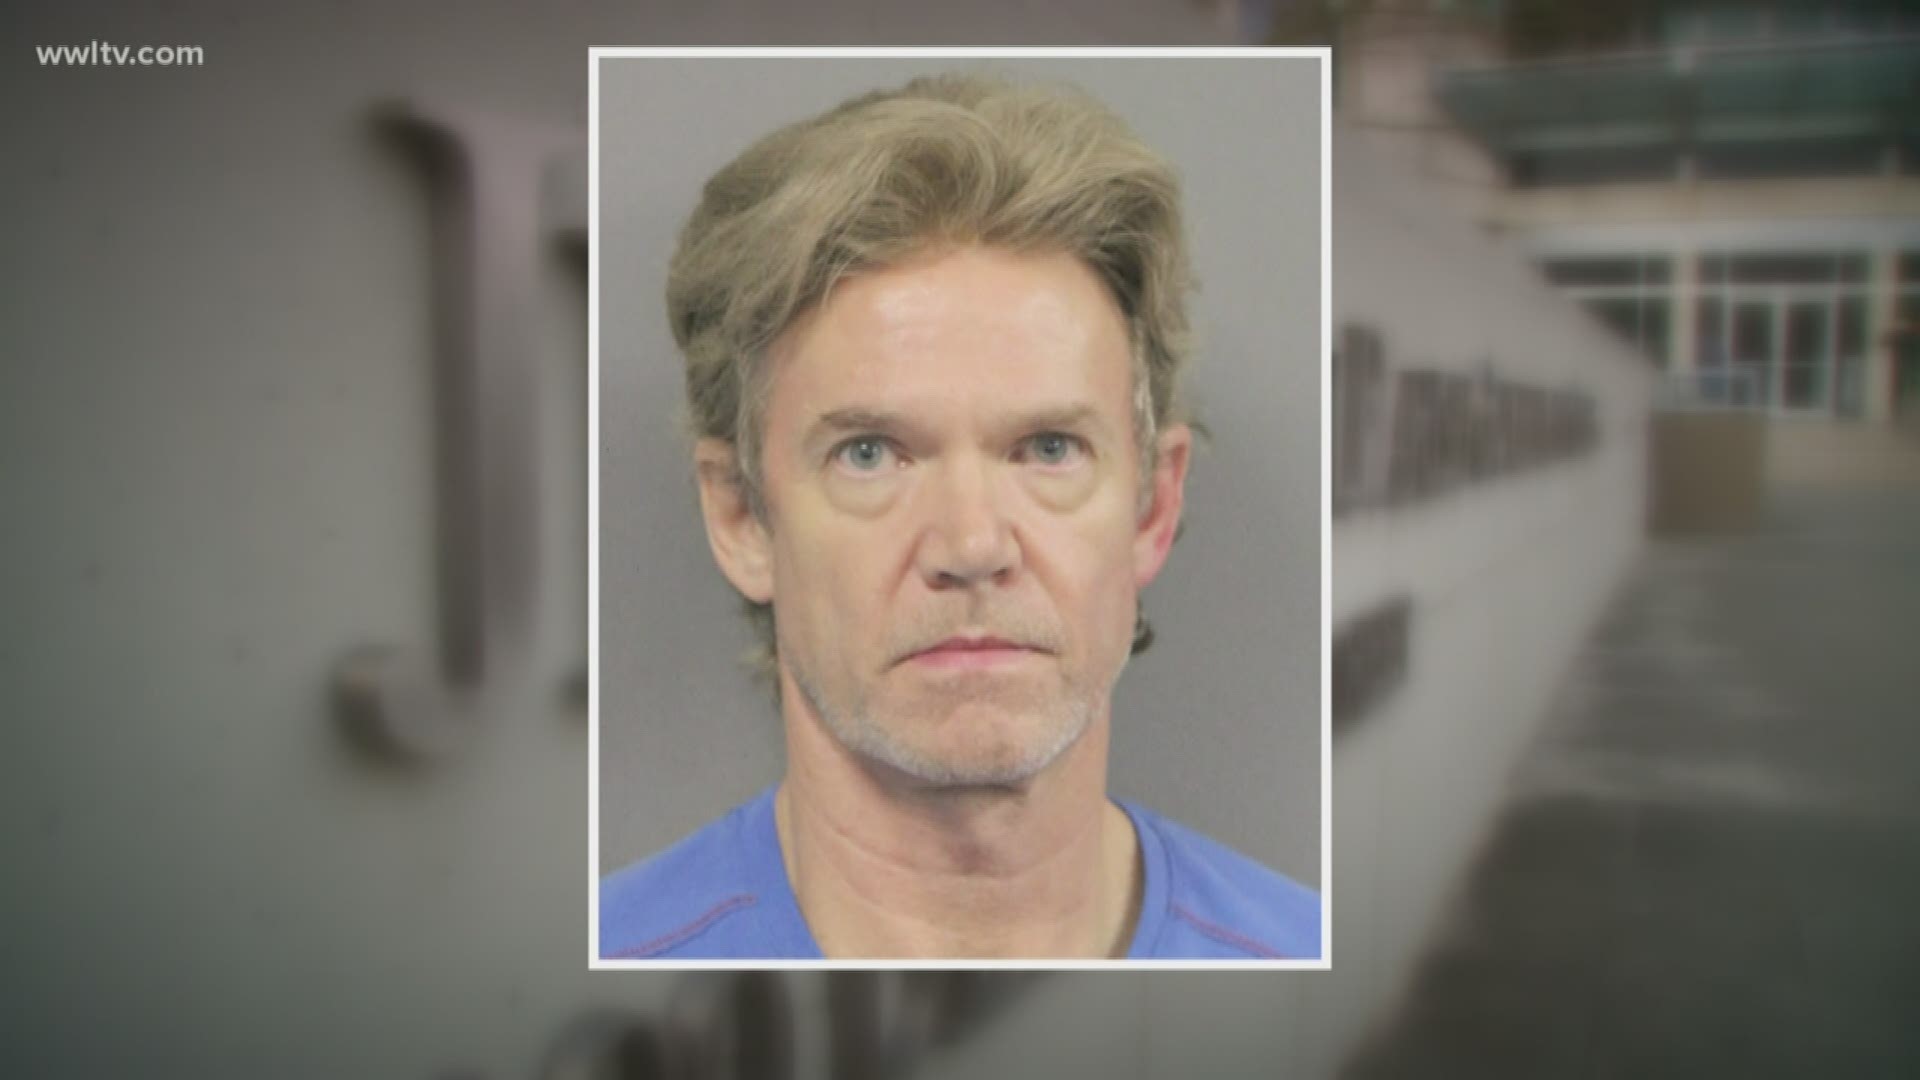 Ronald Gasser's conviction was vacated based on a recent Supreme Court ruling against non-unanimous juries.